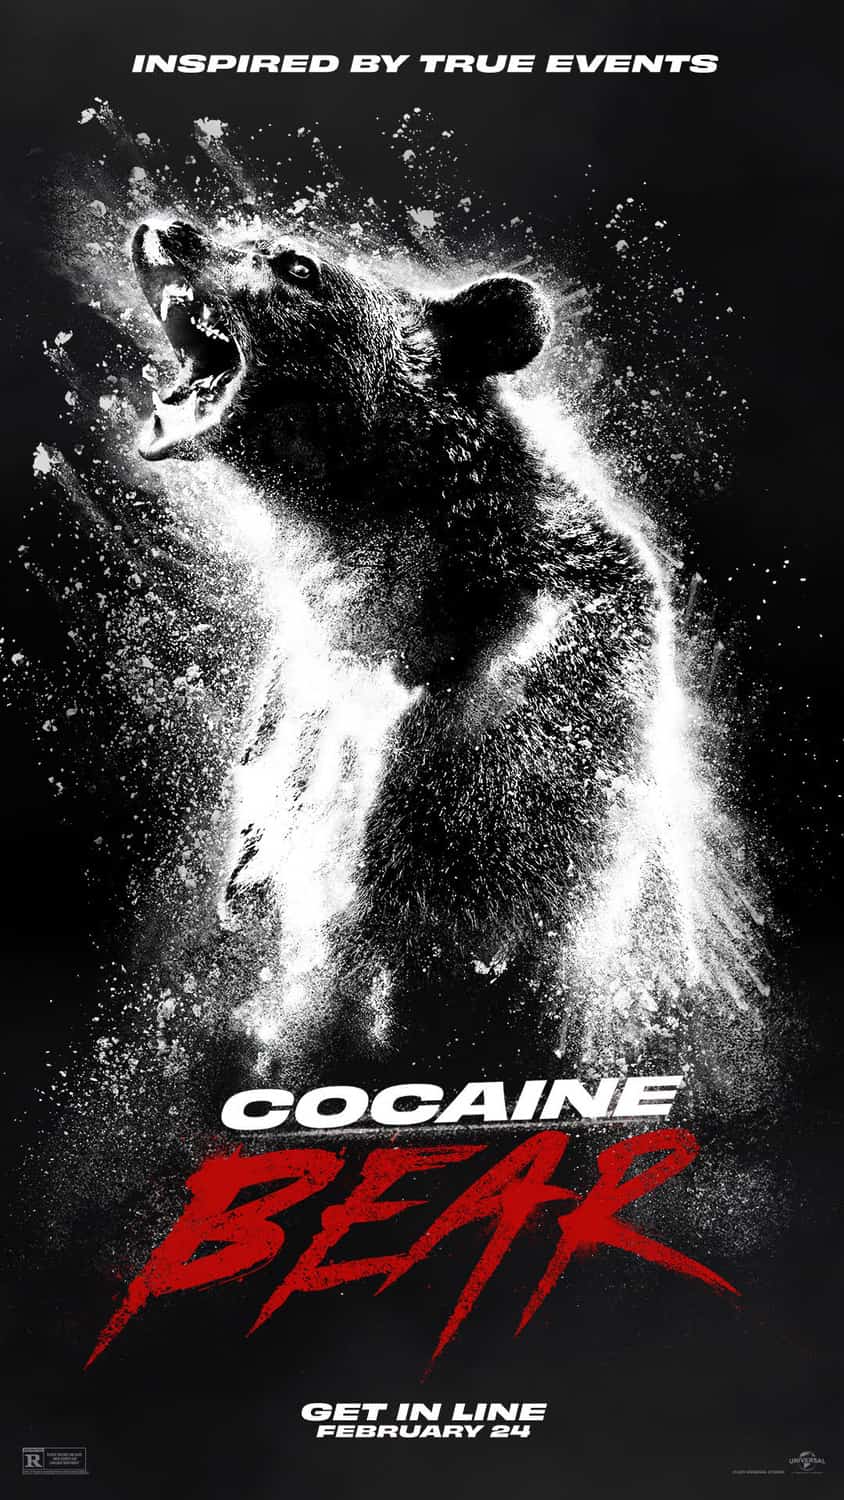 New poster released for Cocaine Bear starring Keri Russell - movie UK release date 24th February 2023 #cocainebear